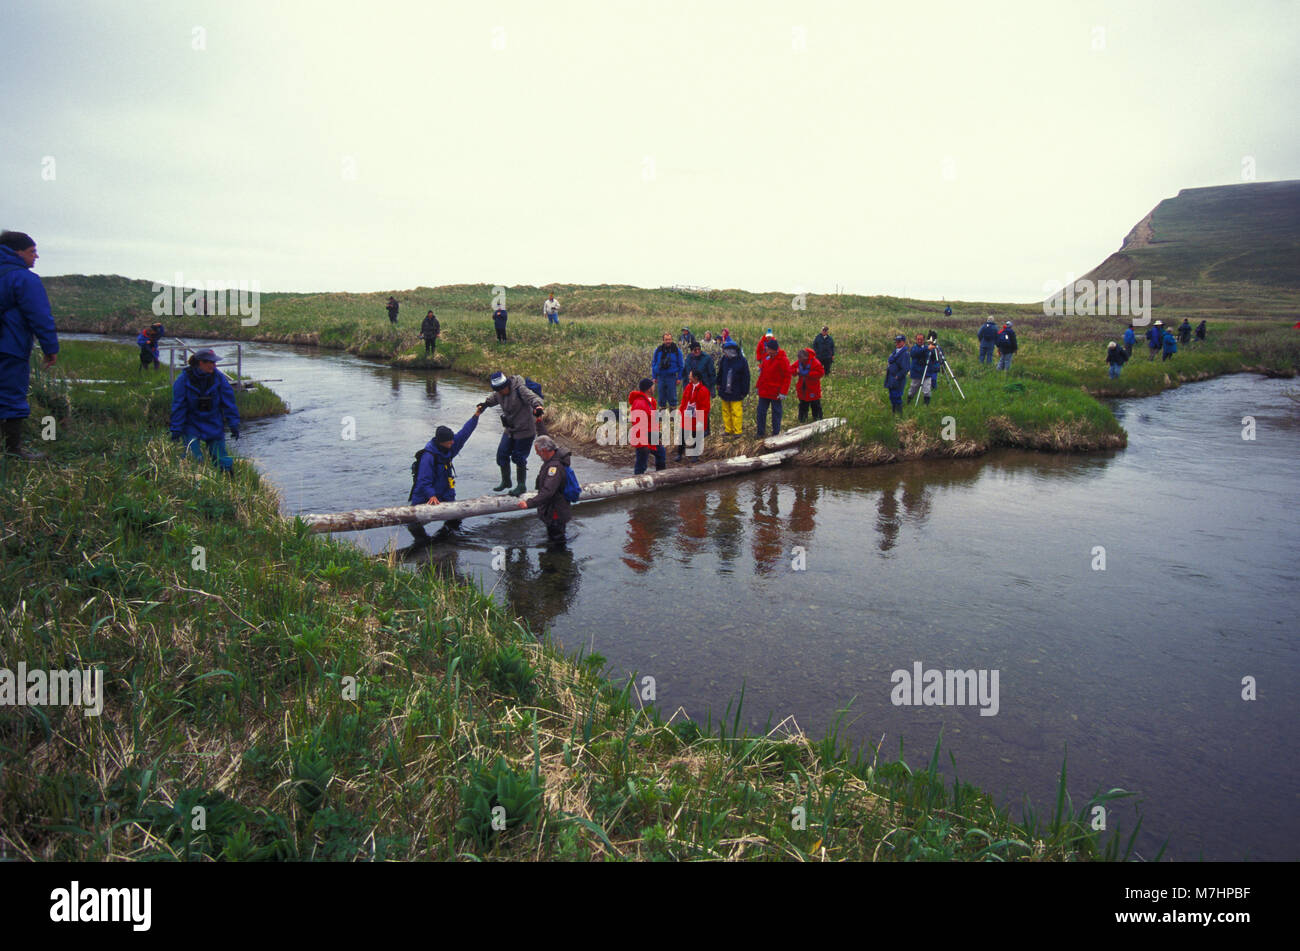 Group of birders and nature lovers on the way to Vitus Bering's grave site on Bering Island, Commander Islands, Siberia.  June 1994 Stock Photo